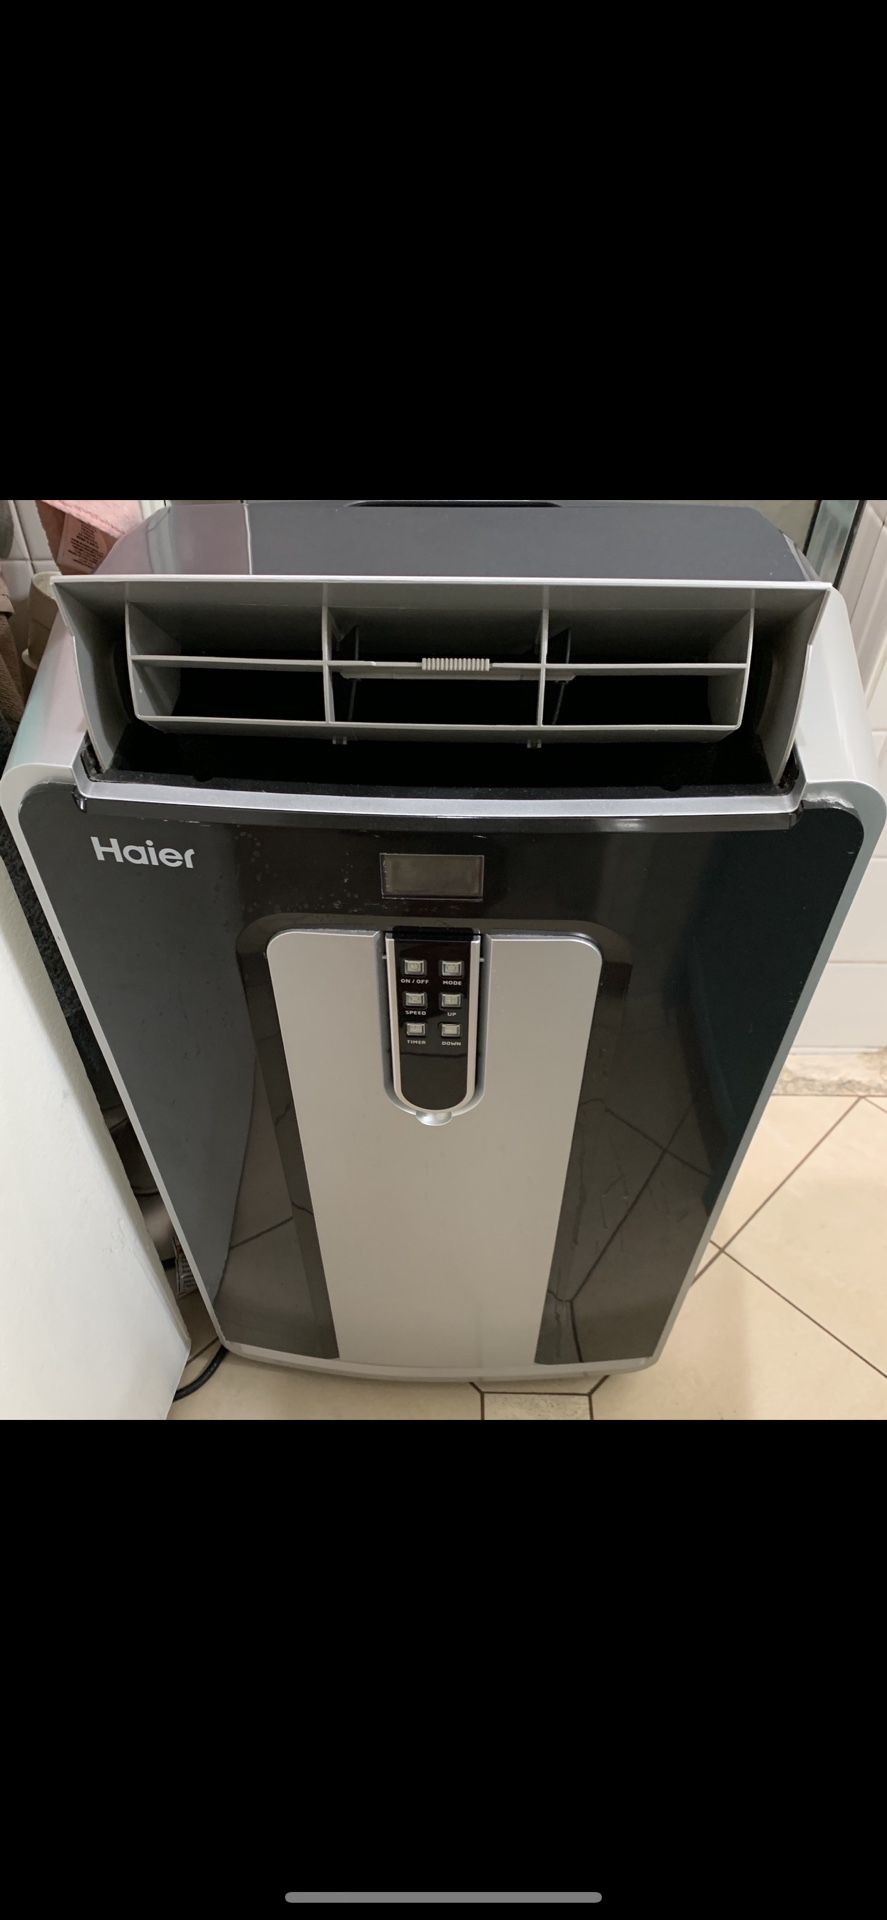 Haier Portable Air Conditioner - Black and Silve